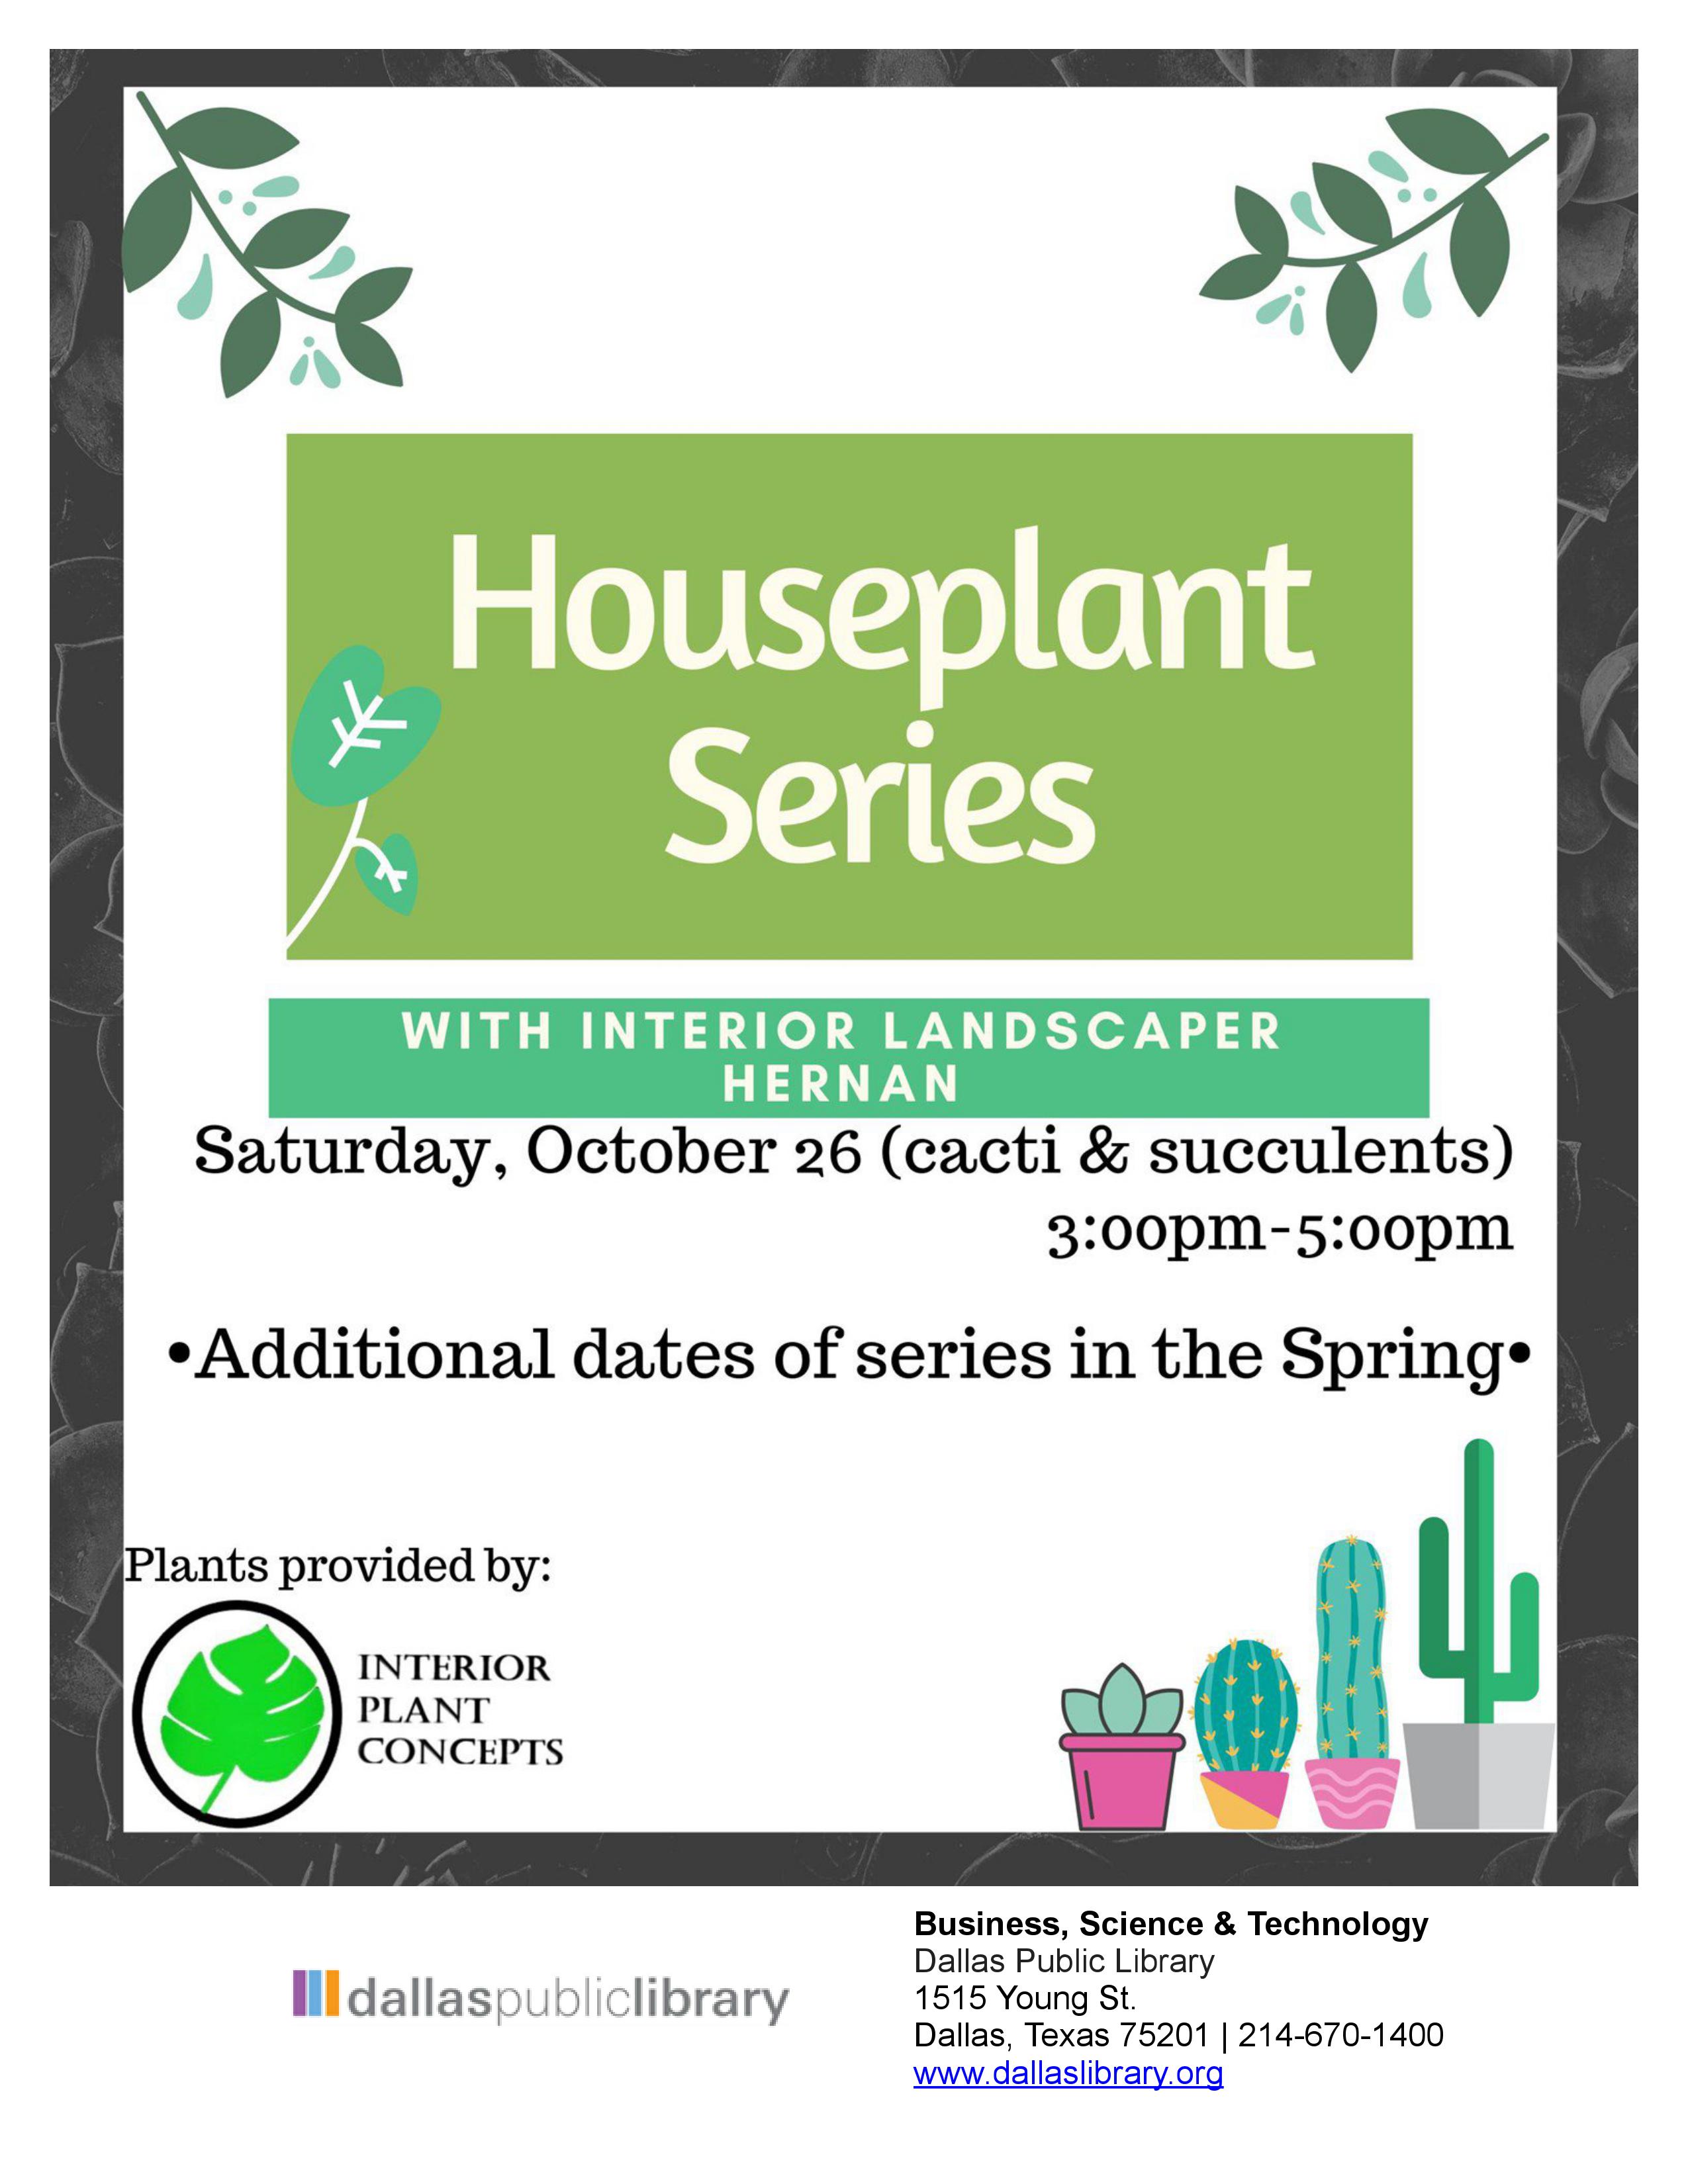 Flyer for a houseplant series focusing on cacti and succulents. Event starts at 3 pm on the 5th floor..